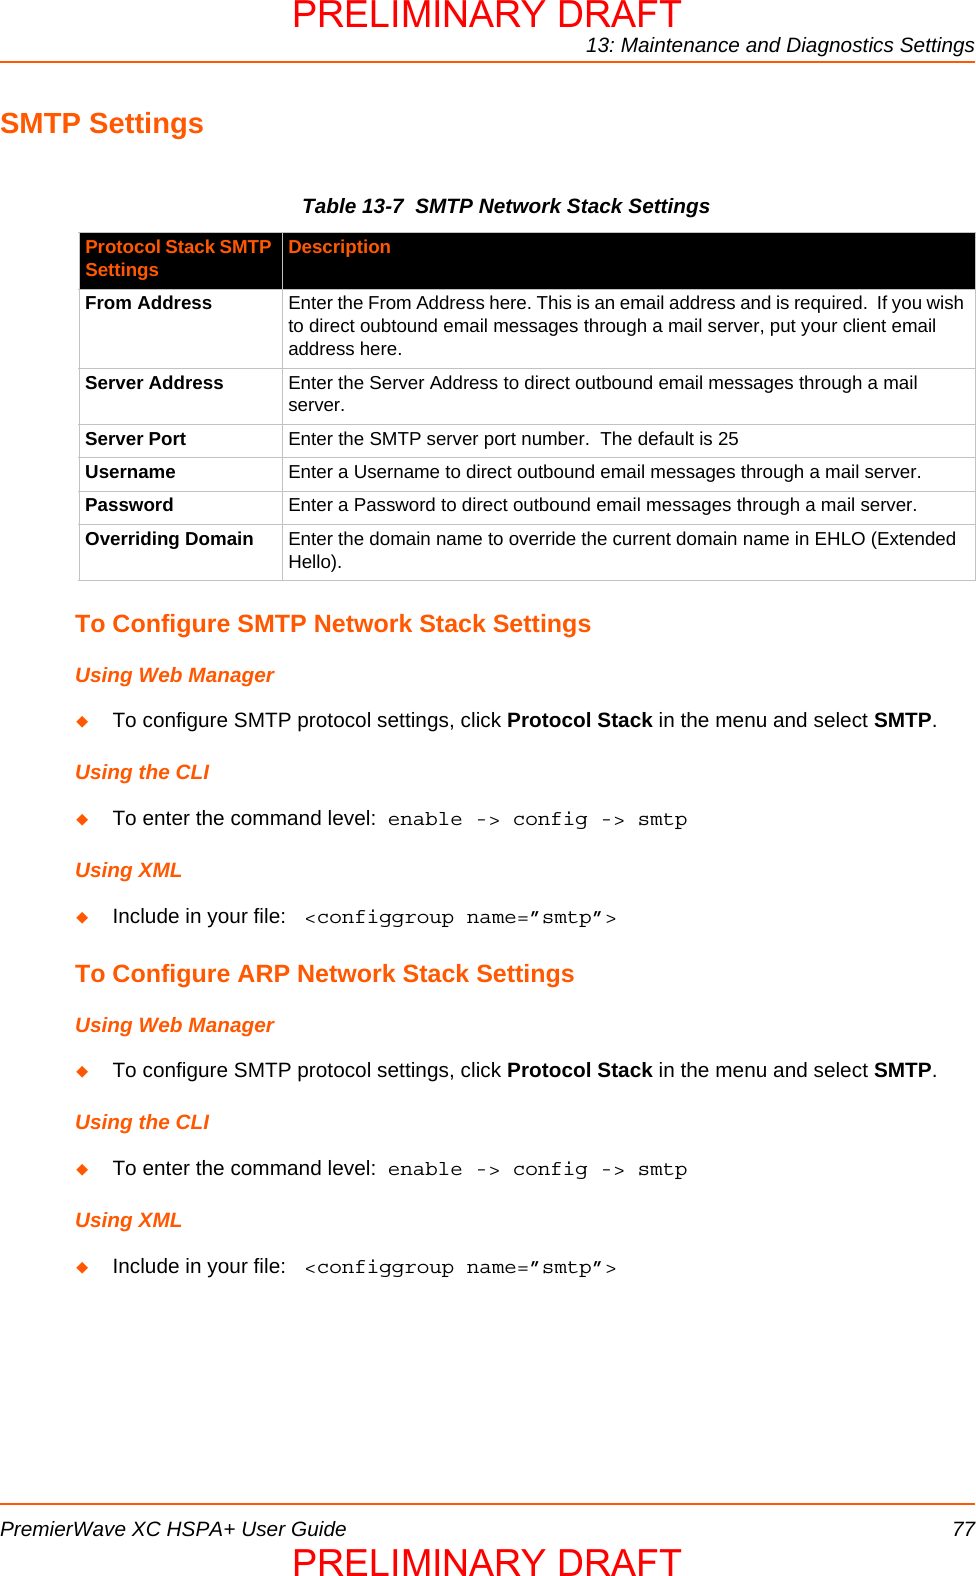 13: Maintenance and Diagnostics SettingsPremierWave XC HSPA+ User Guide 77SMTP SettingsTable 13-7  SMTP Network Stack SettingsTo Configure SMTP Network Stack SettingsUsing Web ManagerTo configure SMTP protocol settings, click Protocol Stack in the menu and select SMTP.Using the CLITo enter the command level:  enable -&gt; config -&gt; smtpUsing XMLInclude in your file:  &lt;configgroup name=”smtp”&gt;To Configure ARP Network Stack SettingsUsing Web ManagerTo configure SMTP protocol settings, click Protocol Stack in the menu and select SMTP.Using the CLITo enter the command level:  enable -&gt; config -&gt; smtpUsing XMLInclude in your file:  &lt;configgroup name=”smtp”&gt;Protocol Stack SMTP Settings DescriptionFrom Address Enter the From Address here. This is an email address and is required.  If you wish to direct oubtound email messages through a mail server, put your client email address here. Server Address Enter the Server Address to direct outbound email messages through a mail server.Server Port Enter the SMTP server port number.  The default is 25 Username Enter a Username to direct outbound email messages through a mail server.Password Enter a Password to direct outbound email messages through a mail server.Overriding Domain Enter the domain name to override the current domain name in EHLO (Extended Hello).PRELIMINARY DRAFTPRELIMINARY DRAFT